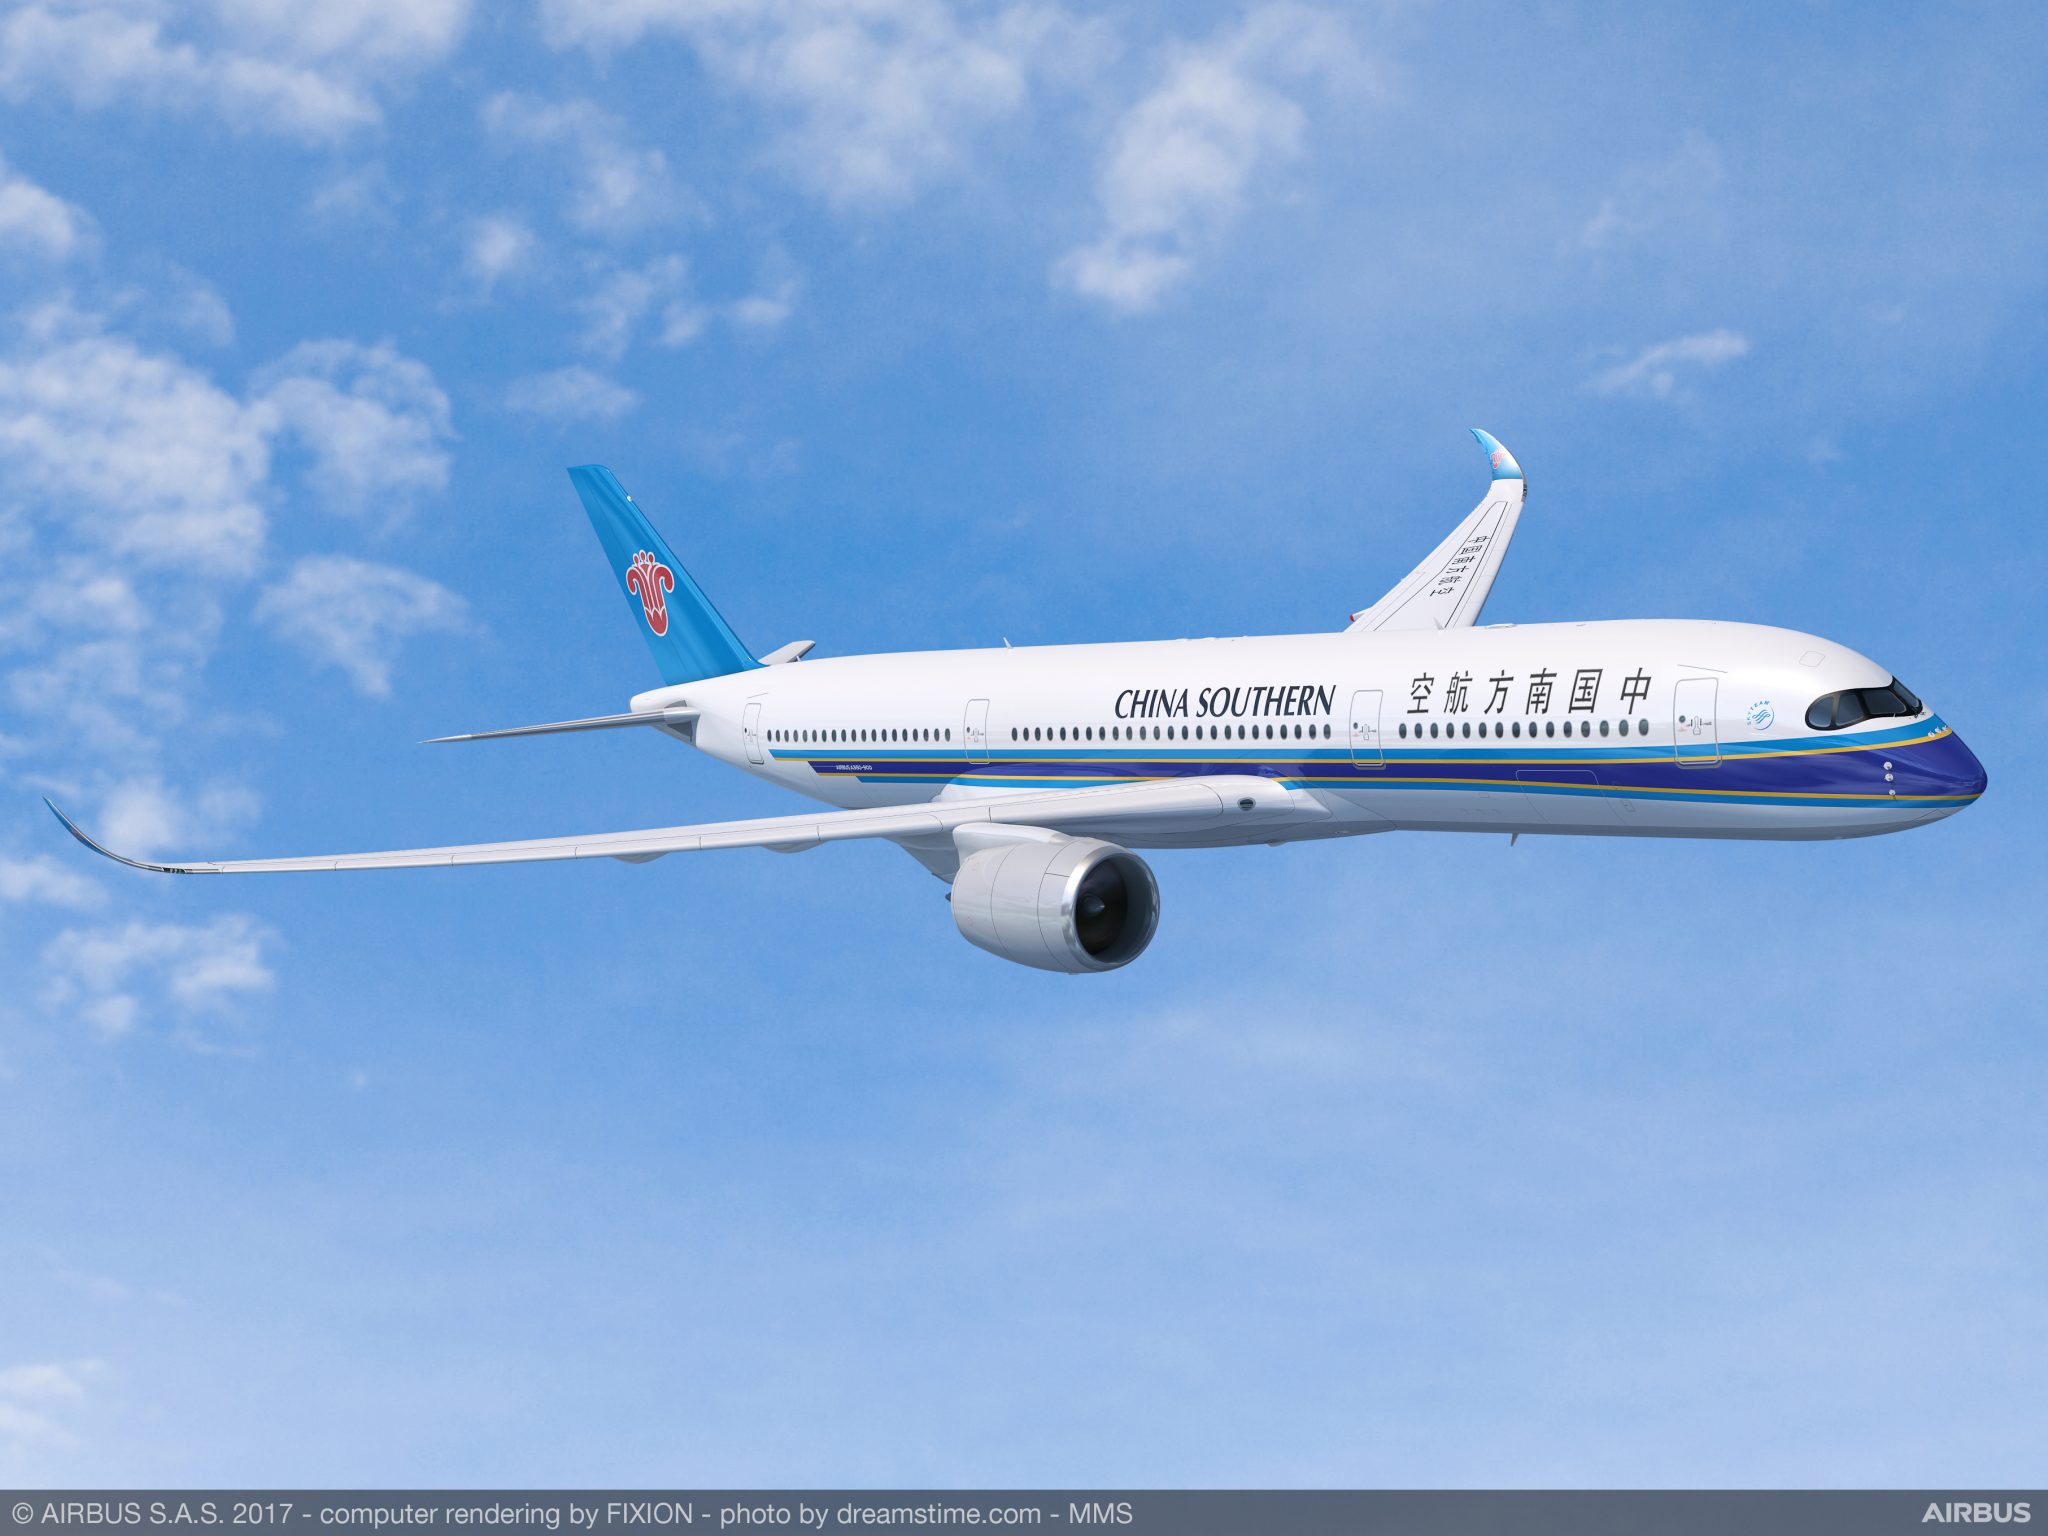 China Southern plans to add 200 Boeing and Airbus jets in three years